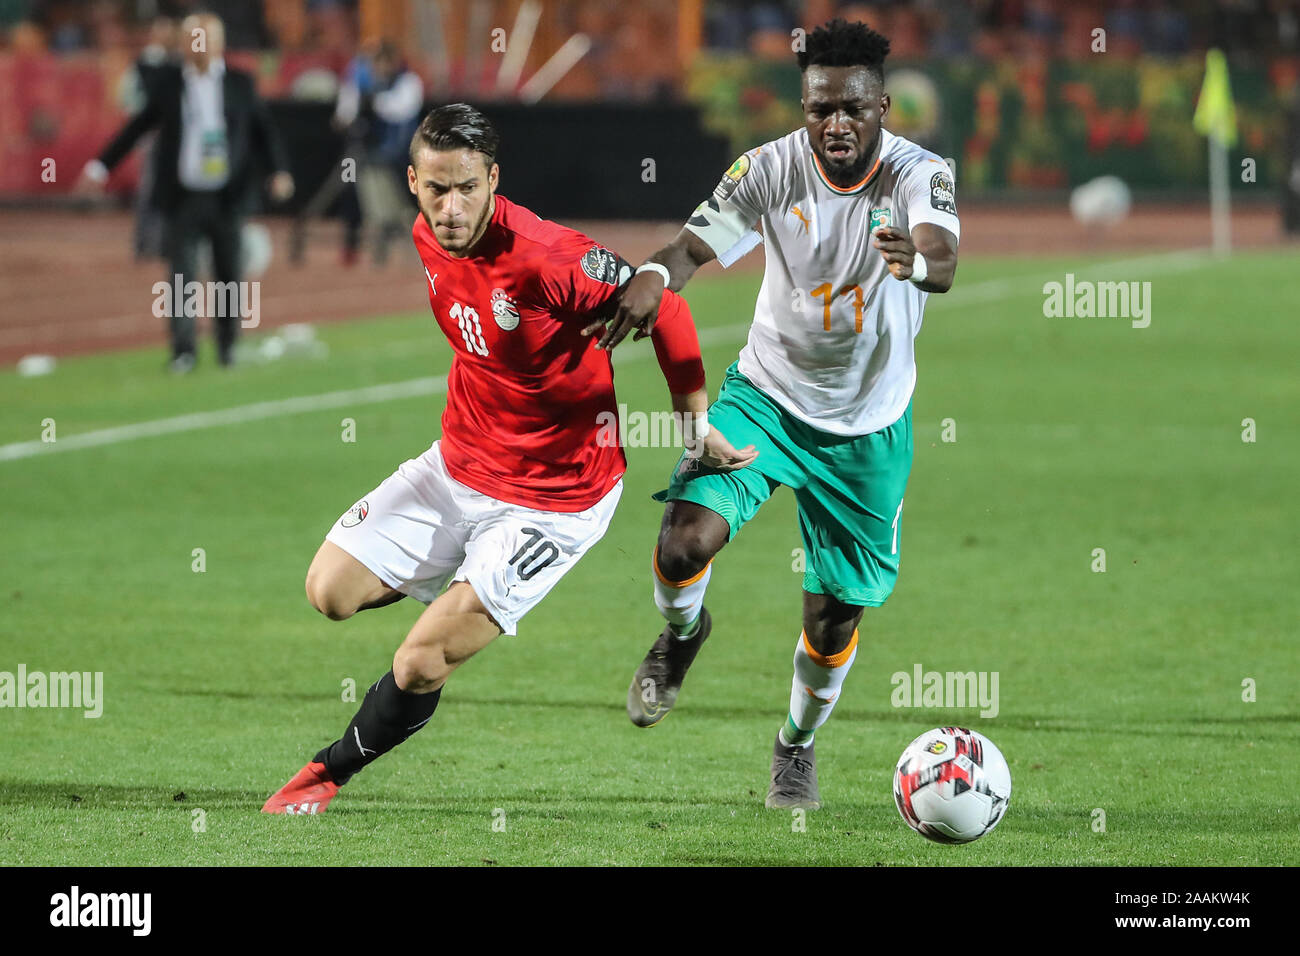 Cairo, Egypt. 22nd Nov, 2019. Egypt's Ramadan Sobhi (L) and Cote d'Ivoire's Diallo Ismael battle for the ball during the Africa U-23 Cup of Nations final soccer match between Egypt and Ivory Coast at the Cairo International Stadium. Credit: Omar Zoheiry/dpa/Alamy Live News Stock Photo